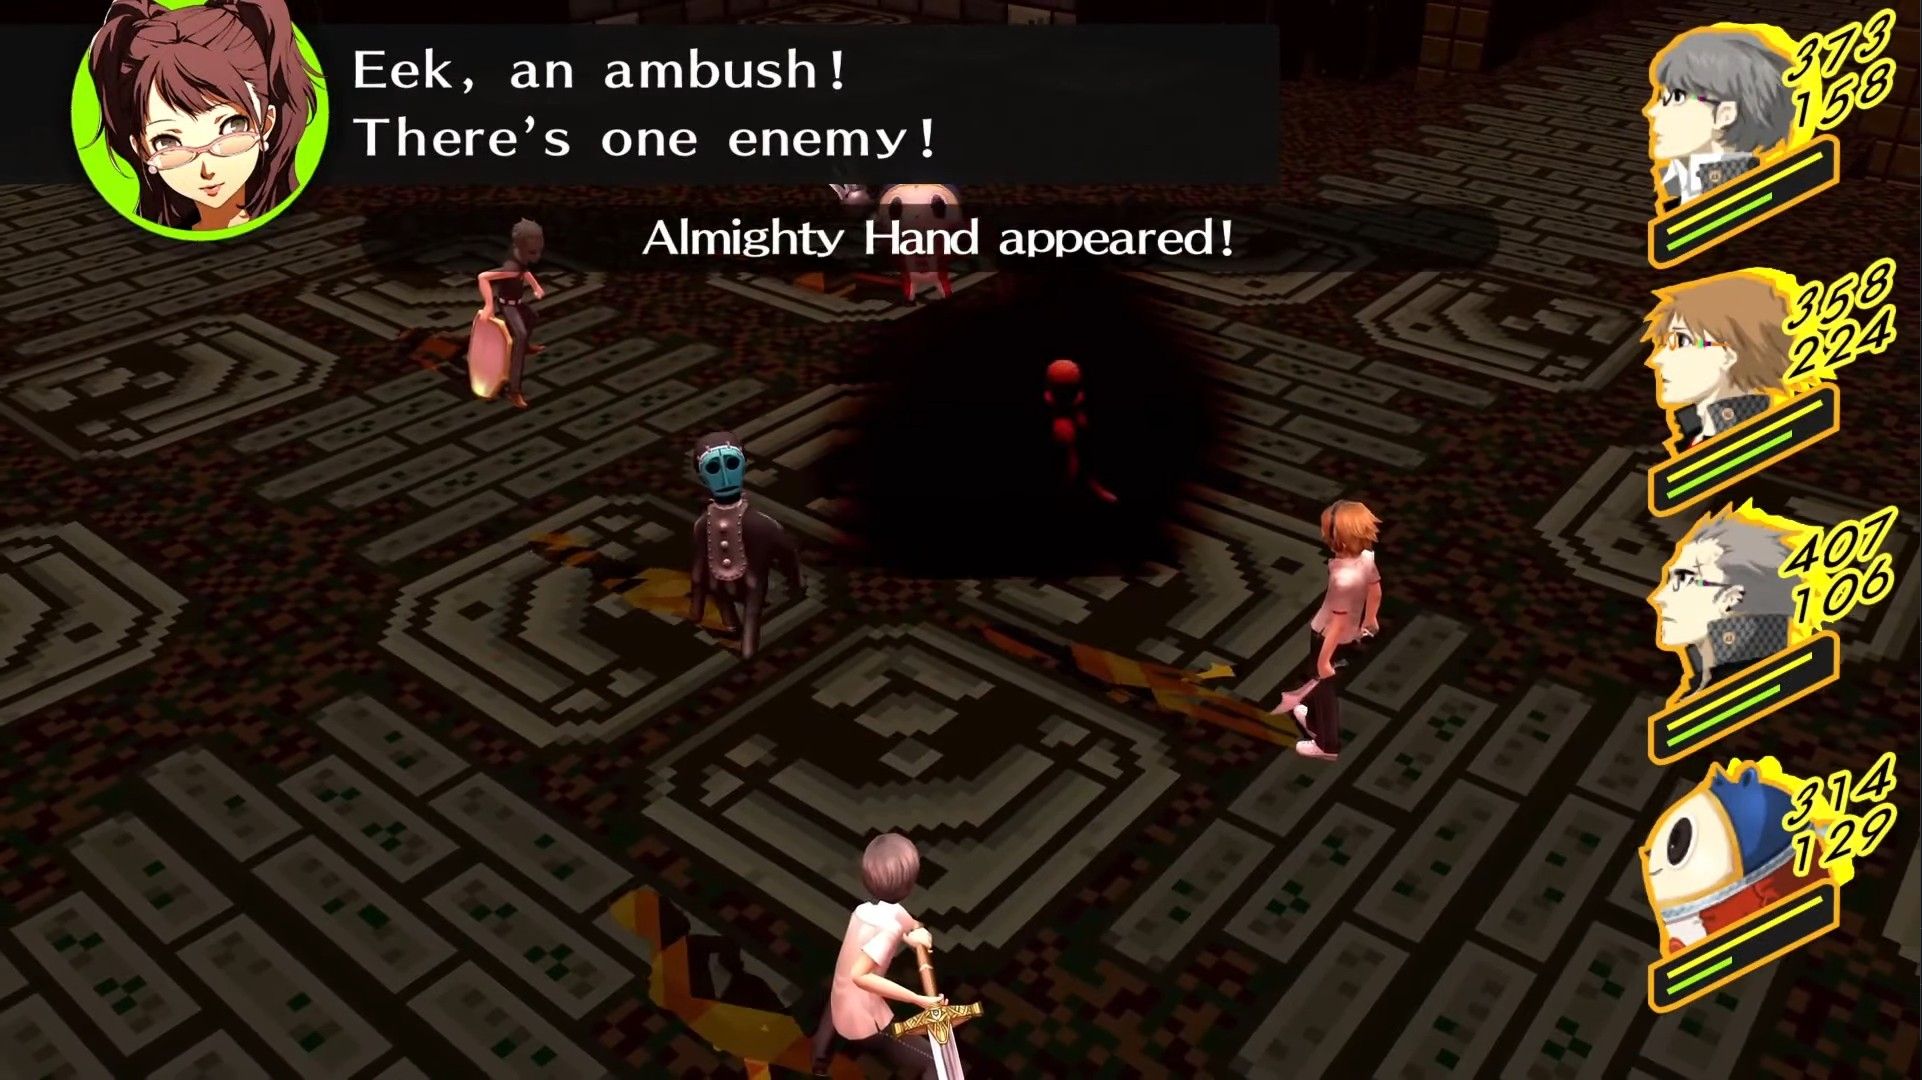 killing hand summoning almighty hand in a mini-boss battle in persona 4 golden